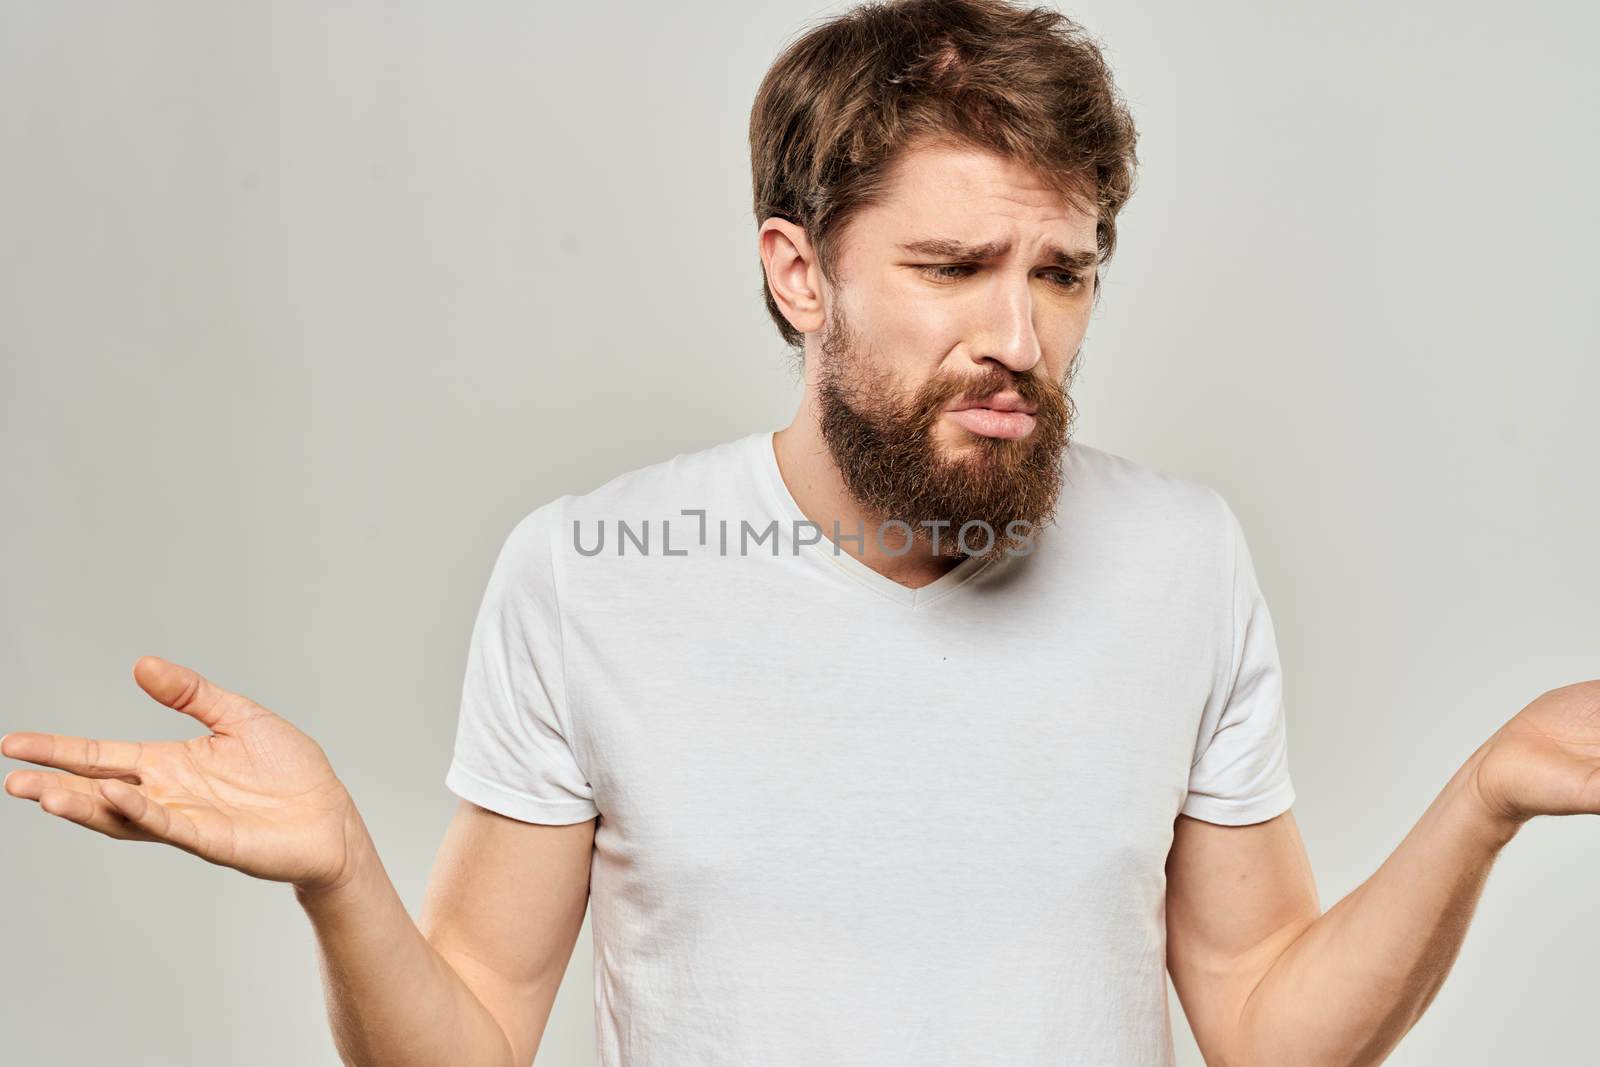 bearded man gesturing with his hands in a white t-shirt aggression light background. High quality photo